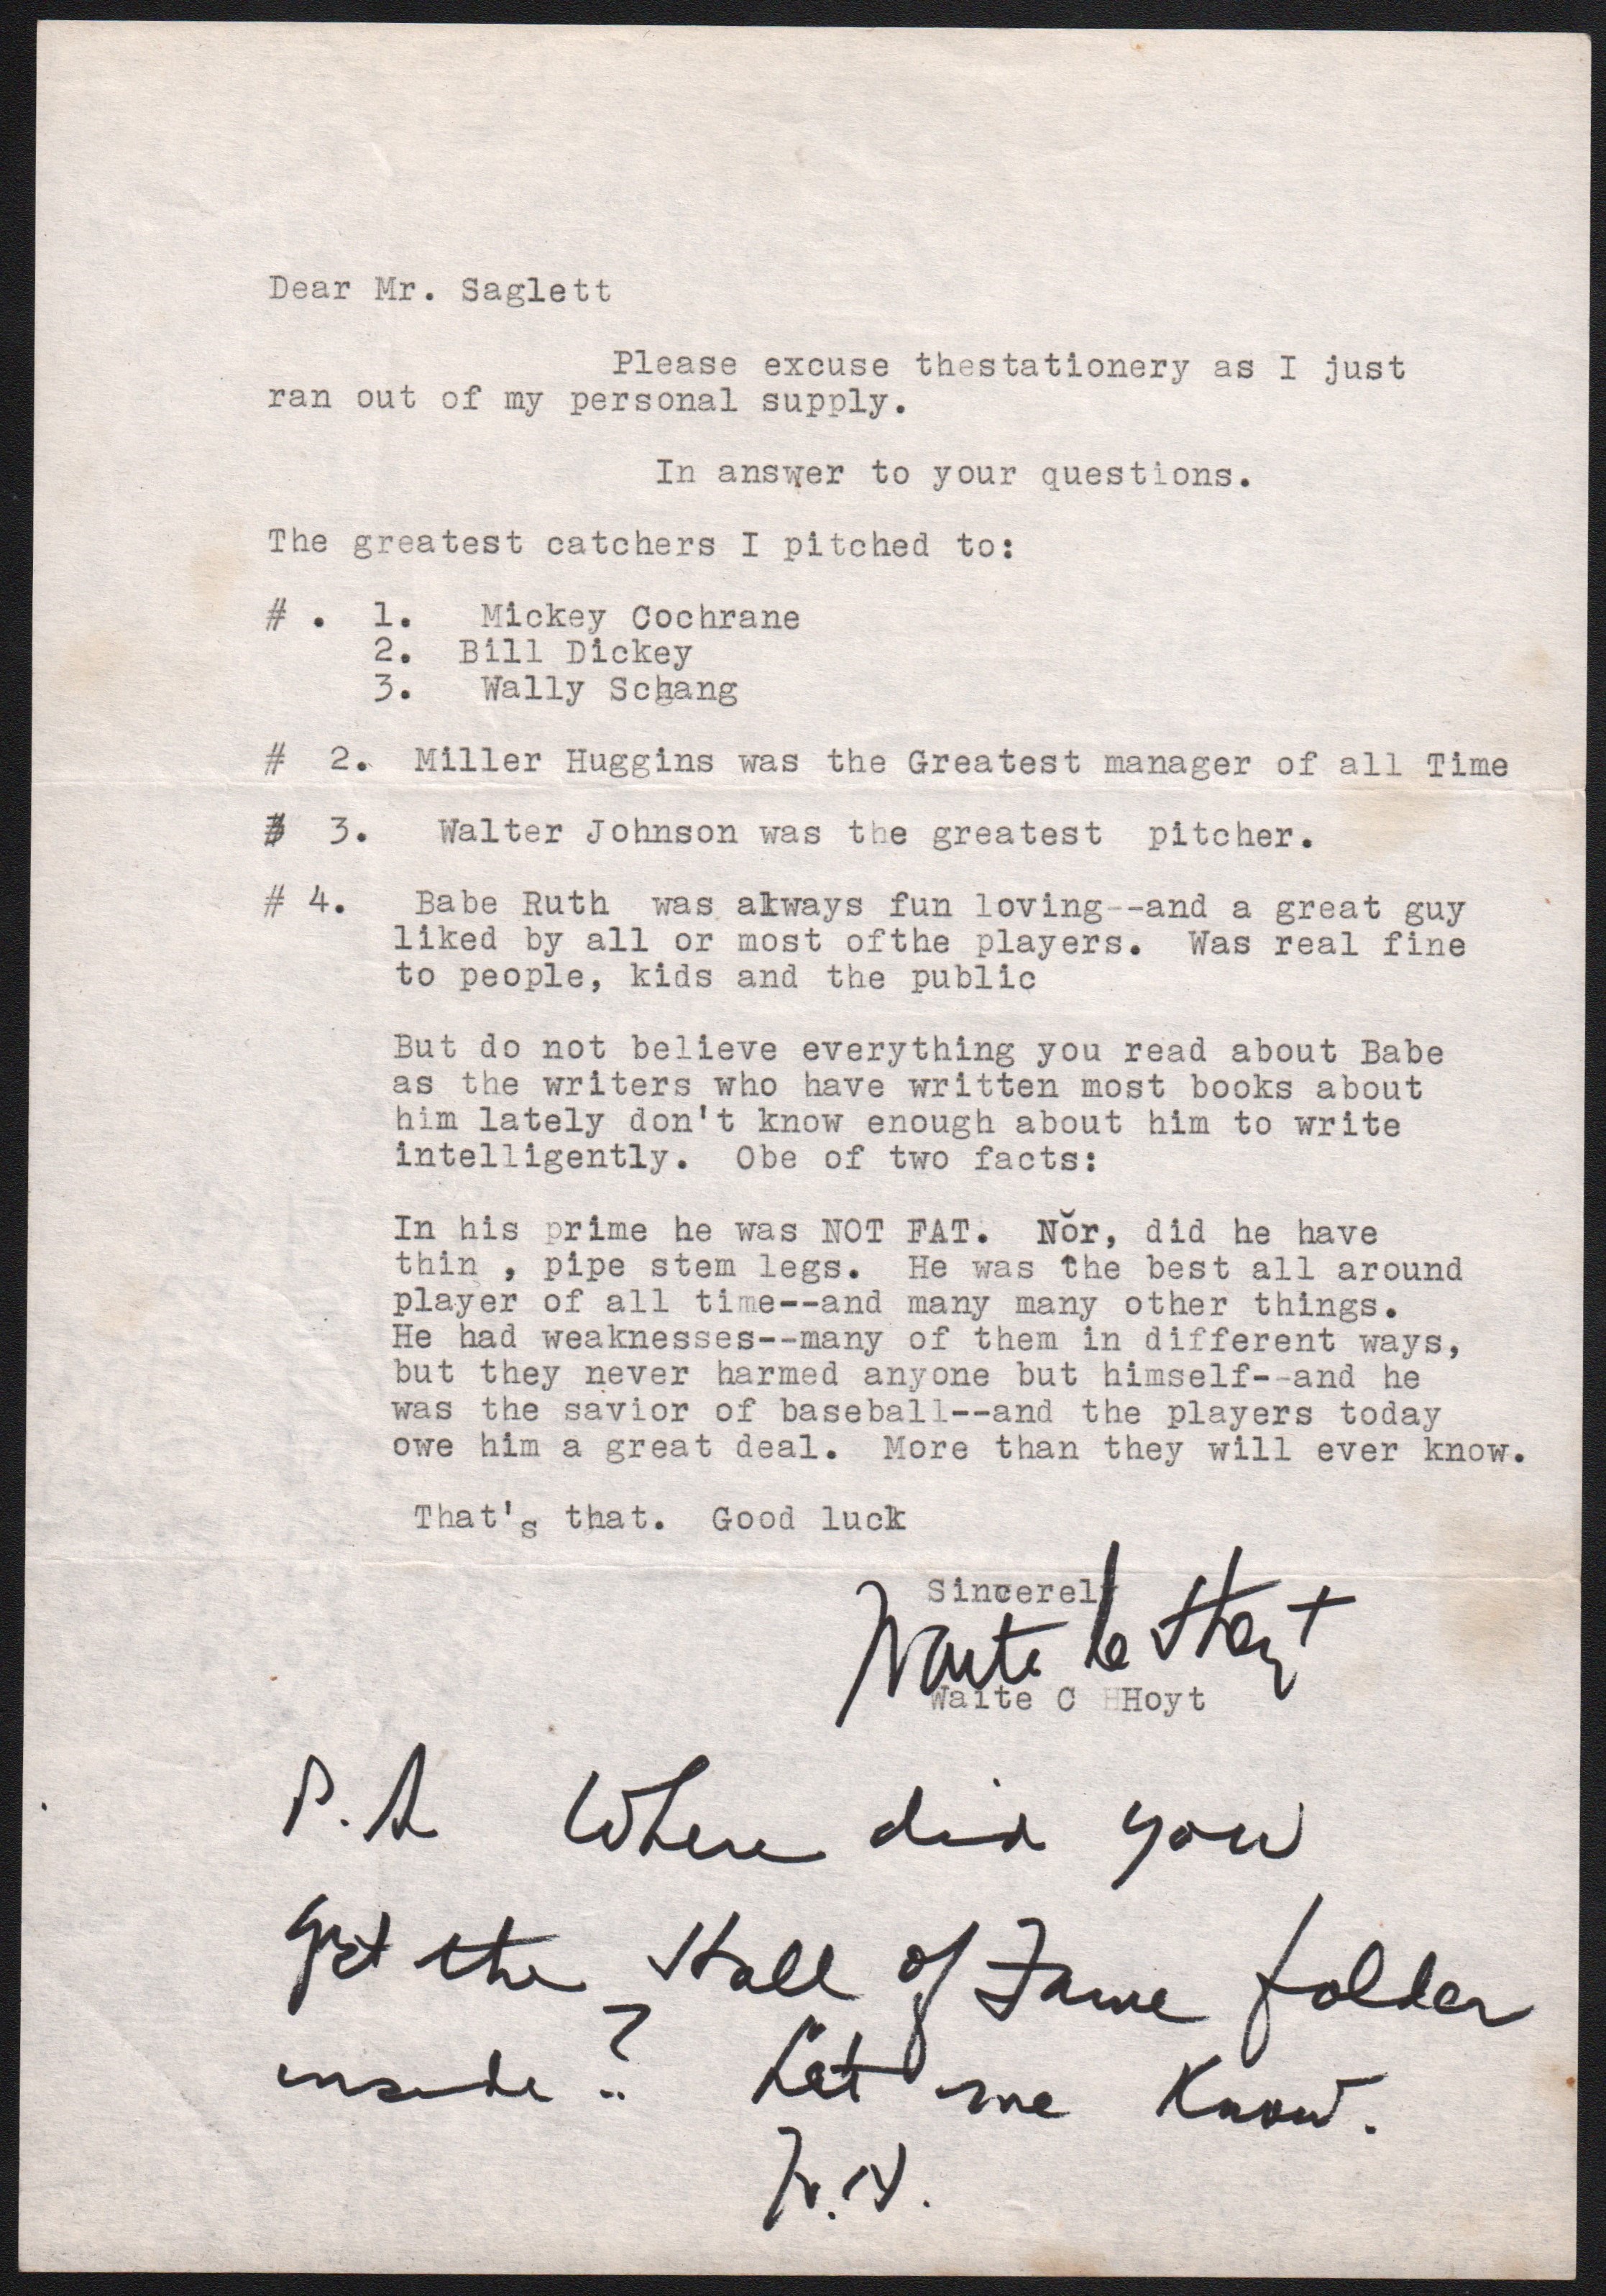 Baseball Autographs - Waite Hoyt Letter w/ Babe Ruth and Walter Johnson Content